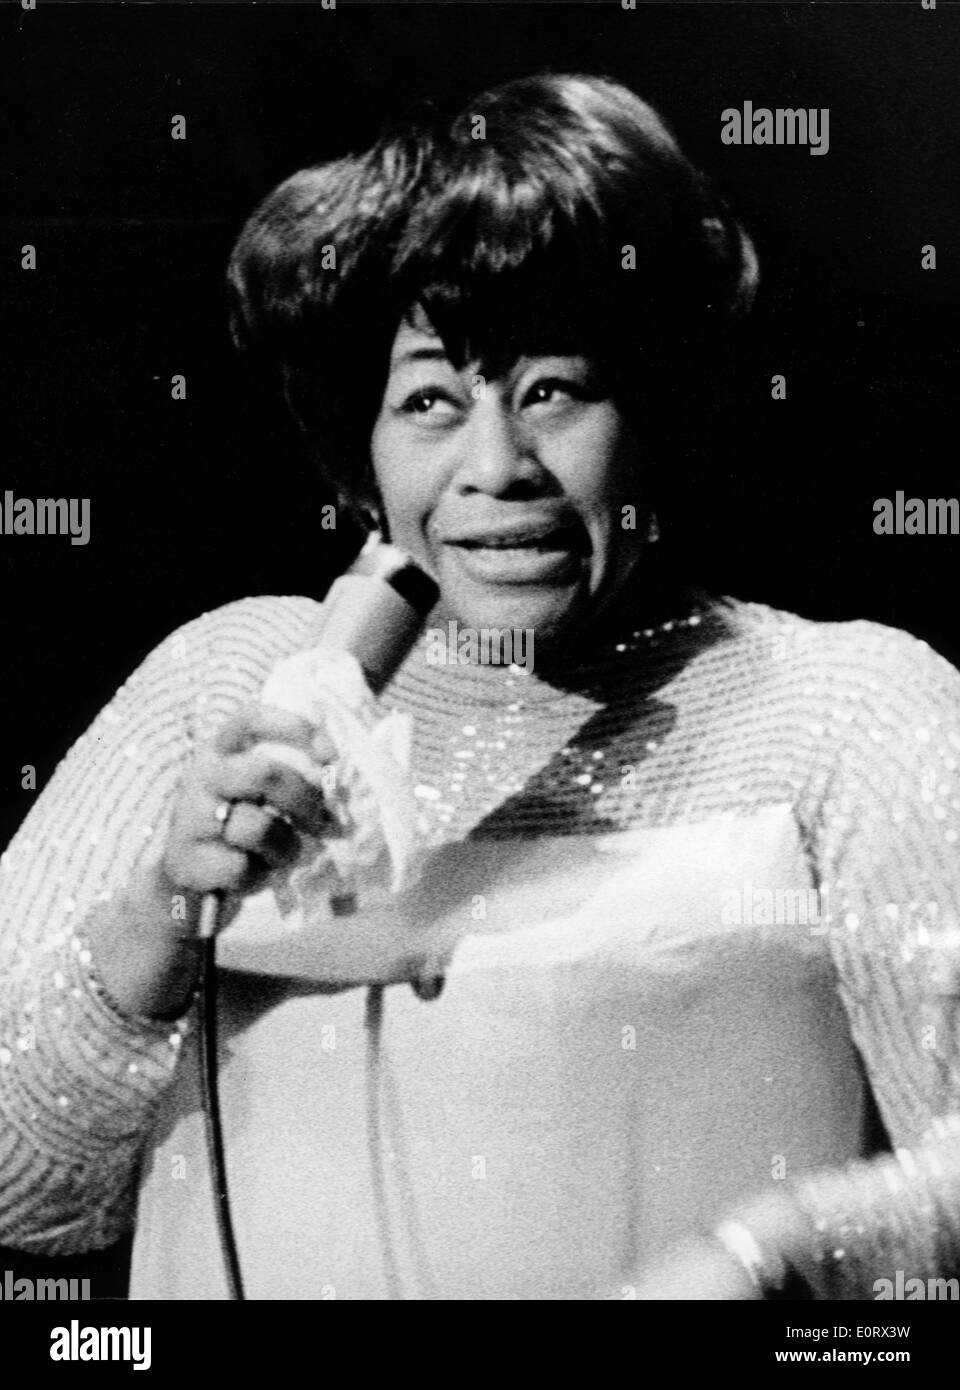 Singer Ella Fitzgerald performs during a concert Stock Photo